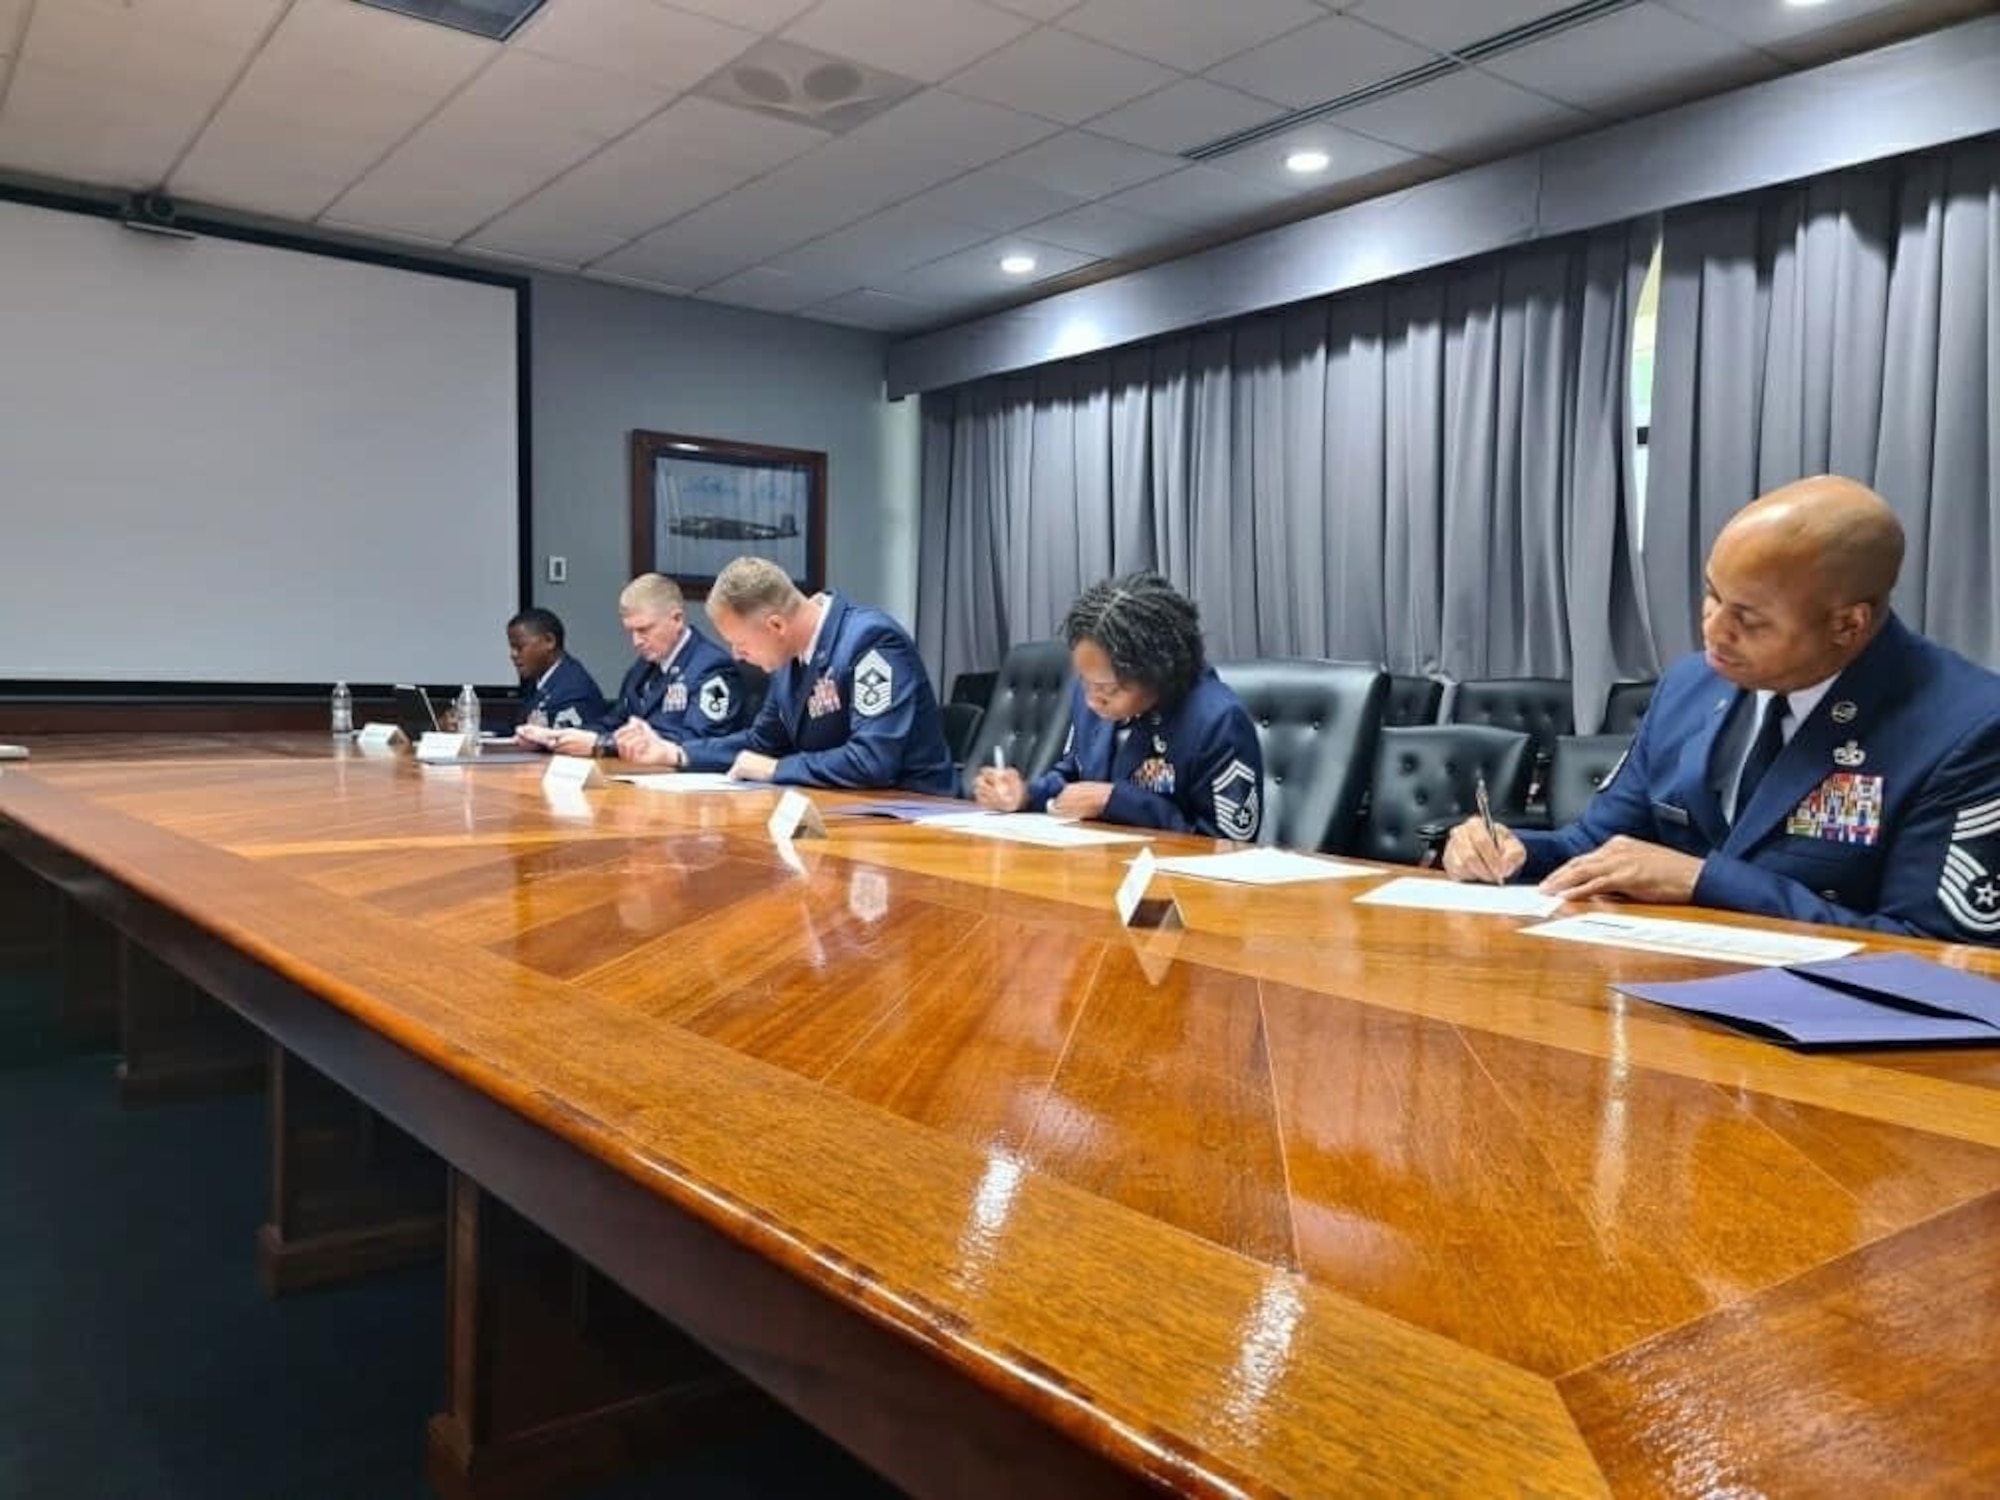 Members of the BTZ panel asses Airman. Commanders and senior enlisted leaders submit their nominees under the Team Maxwell-Gunter BTZ Operations Order, which requires the nominees to have a 1206 nomination package and to meet the in-person panel.